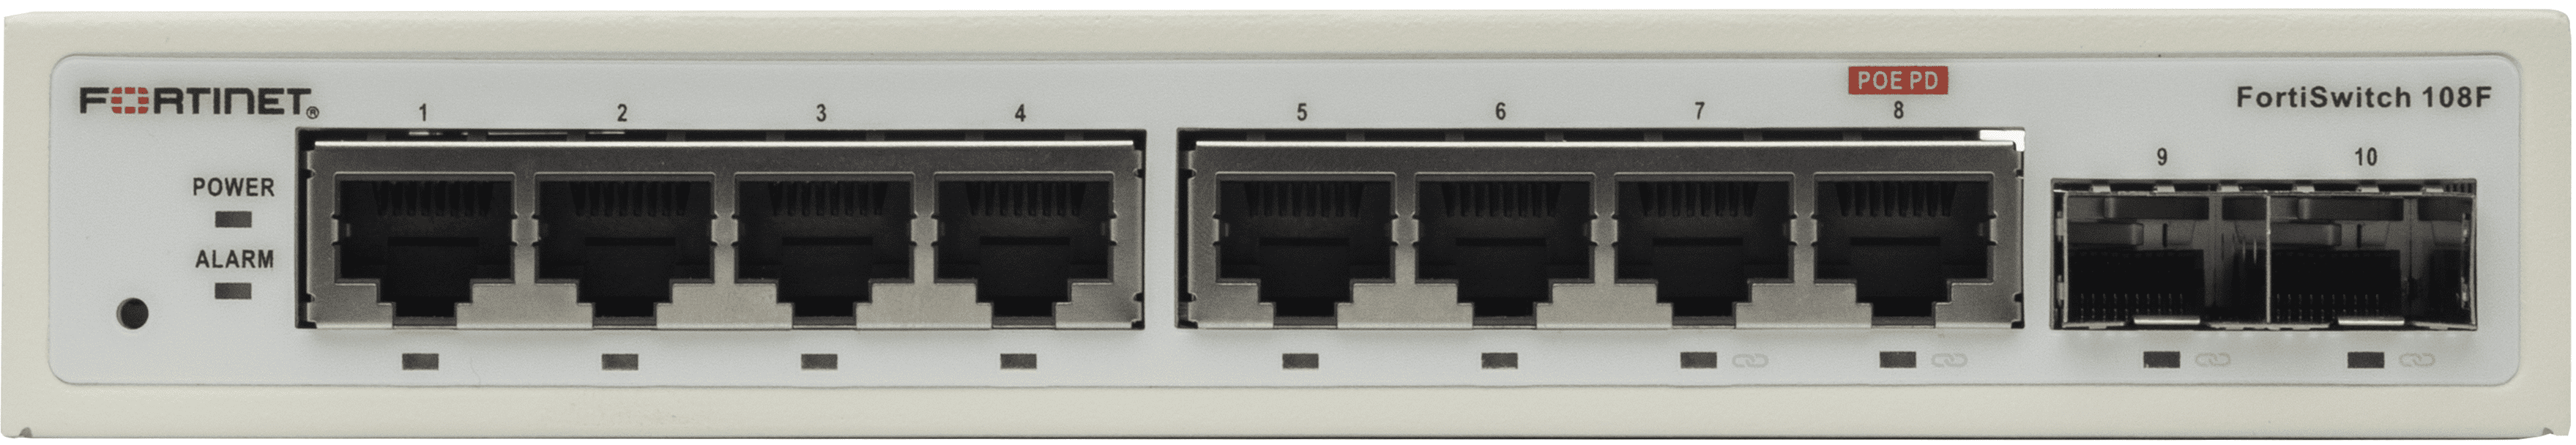 Fortinet FortiSwitch-108F